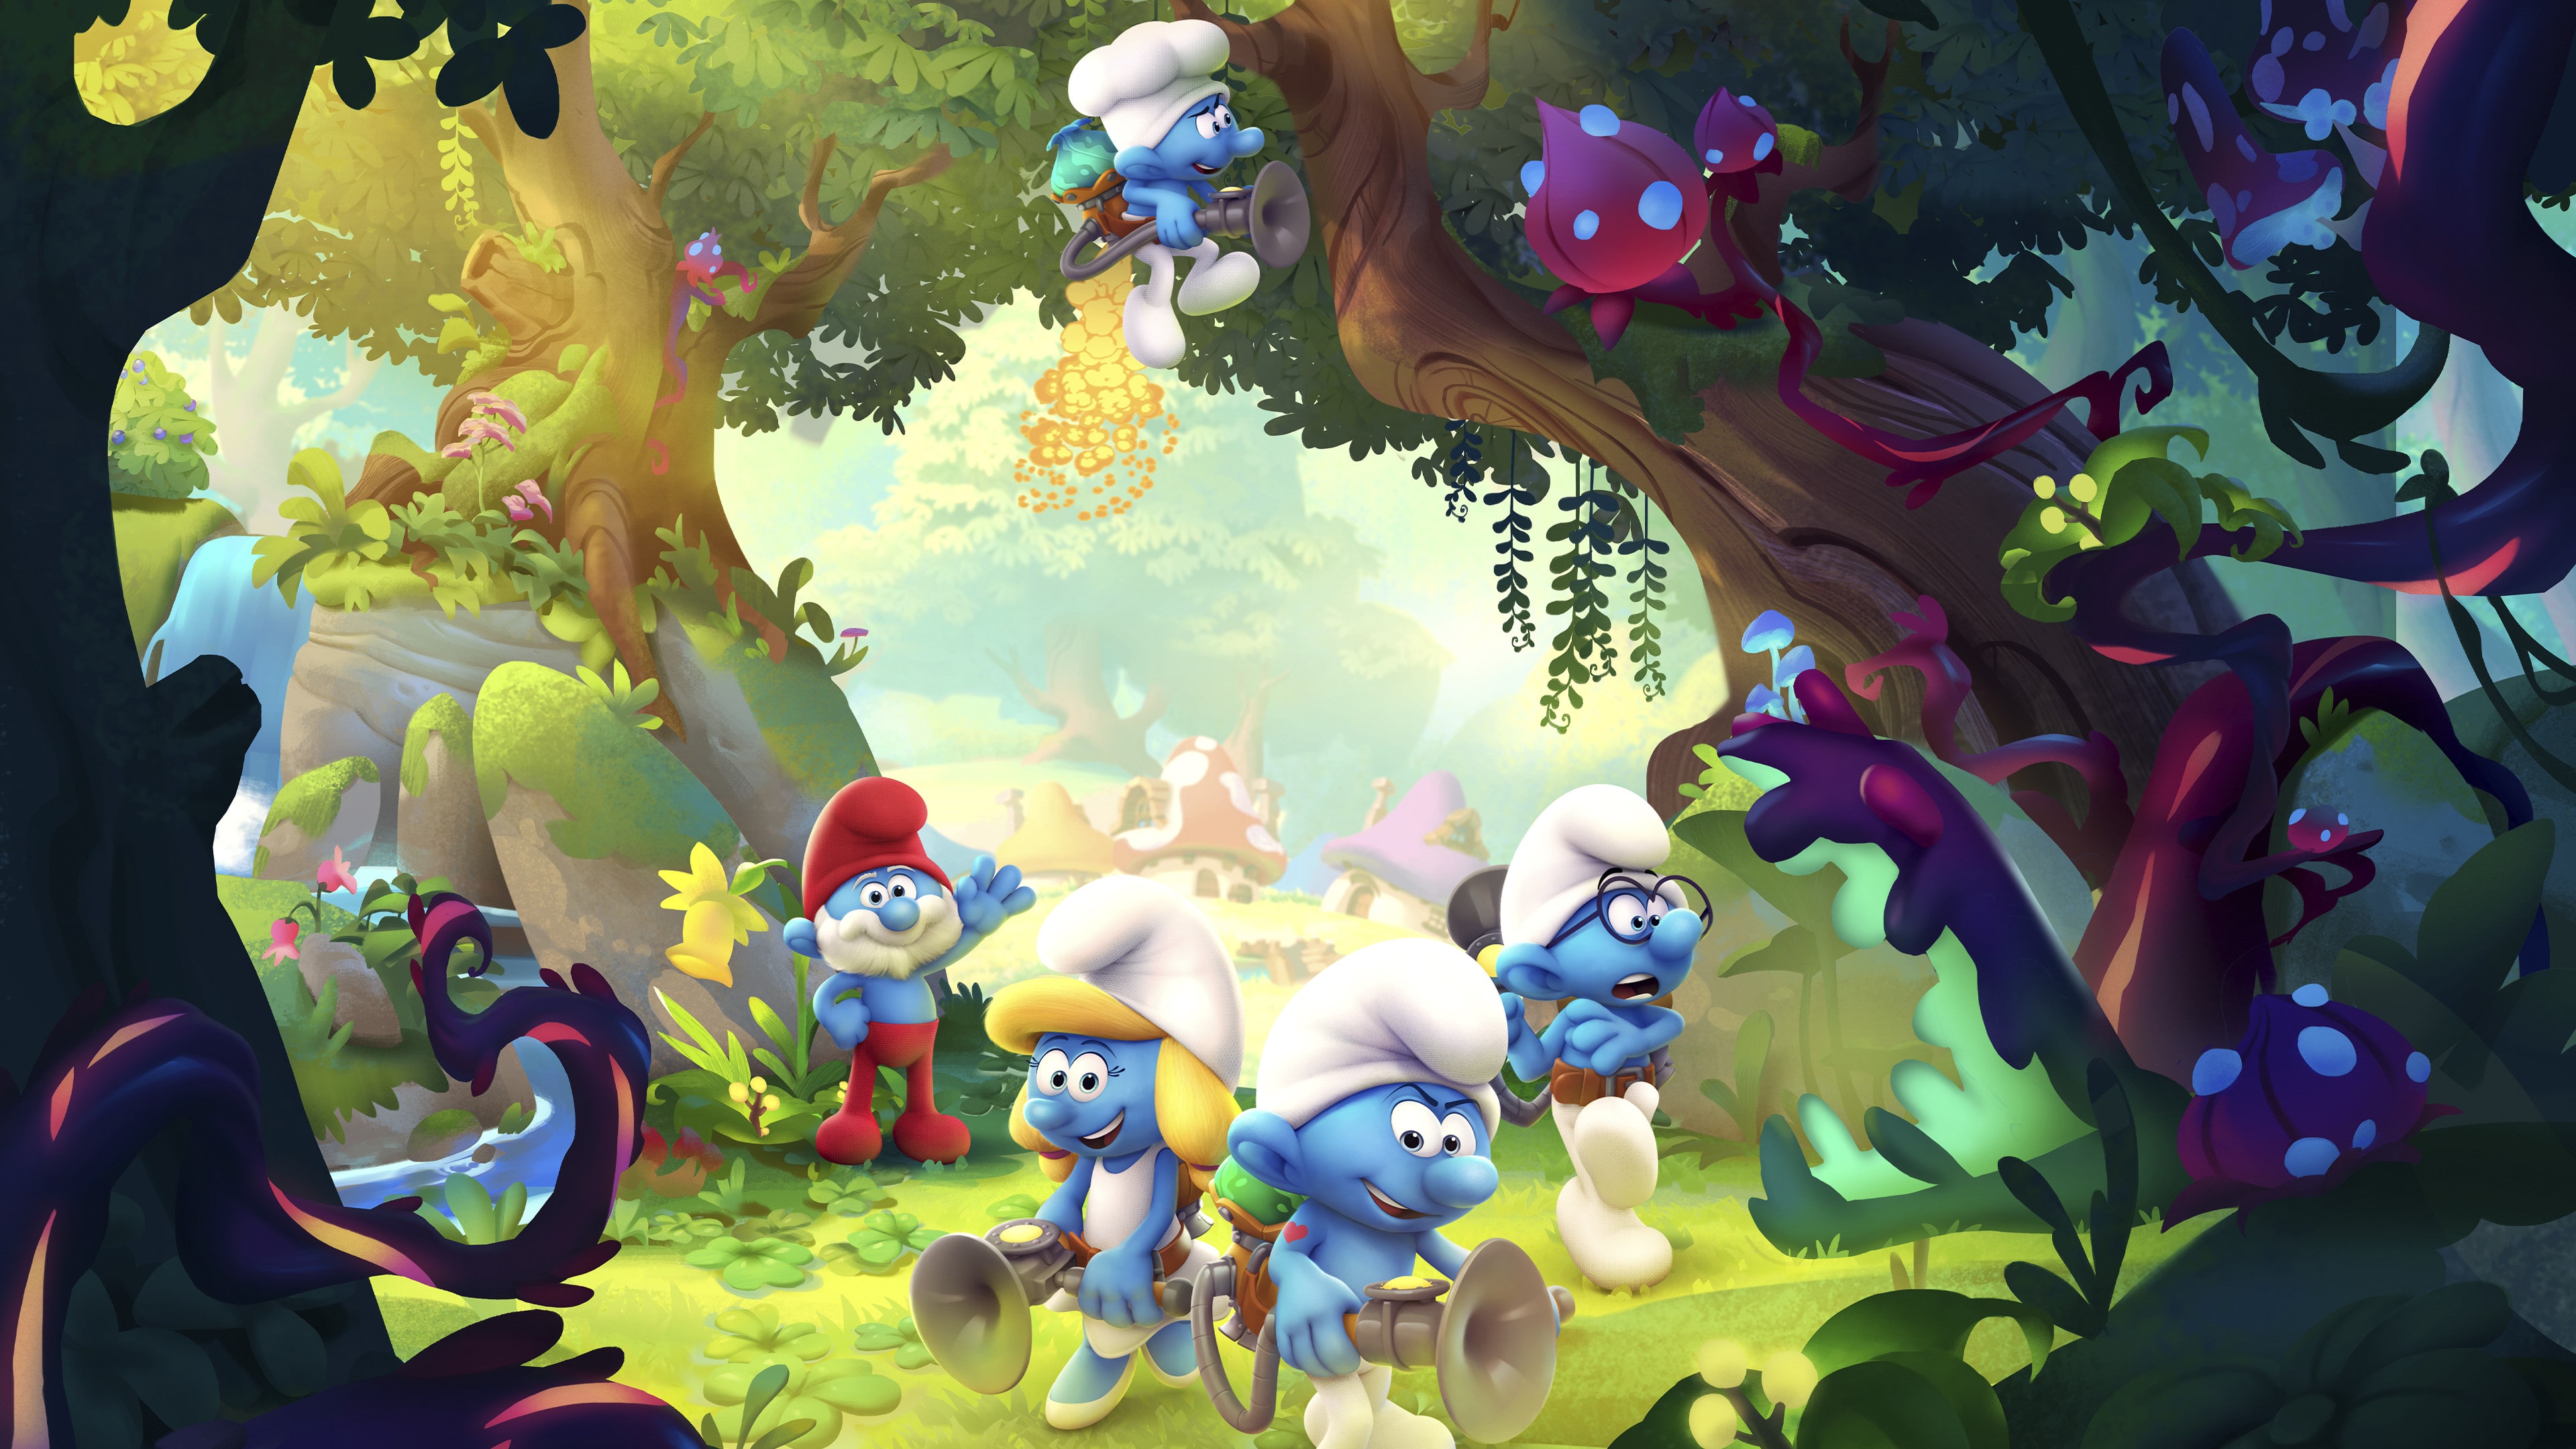 The Smurfs - Mission Vileaf (Simplified Chinese, English, Korean, Japanese, Traditional Chinese)